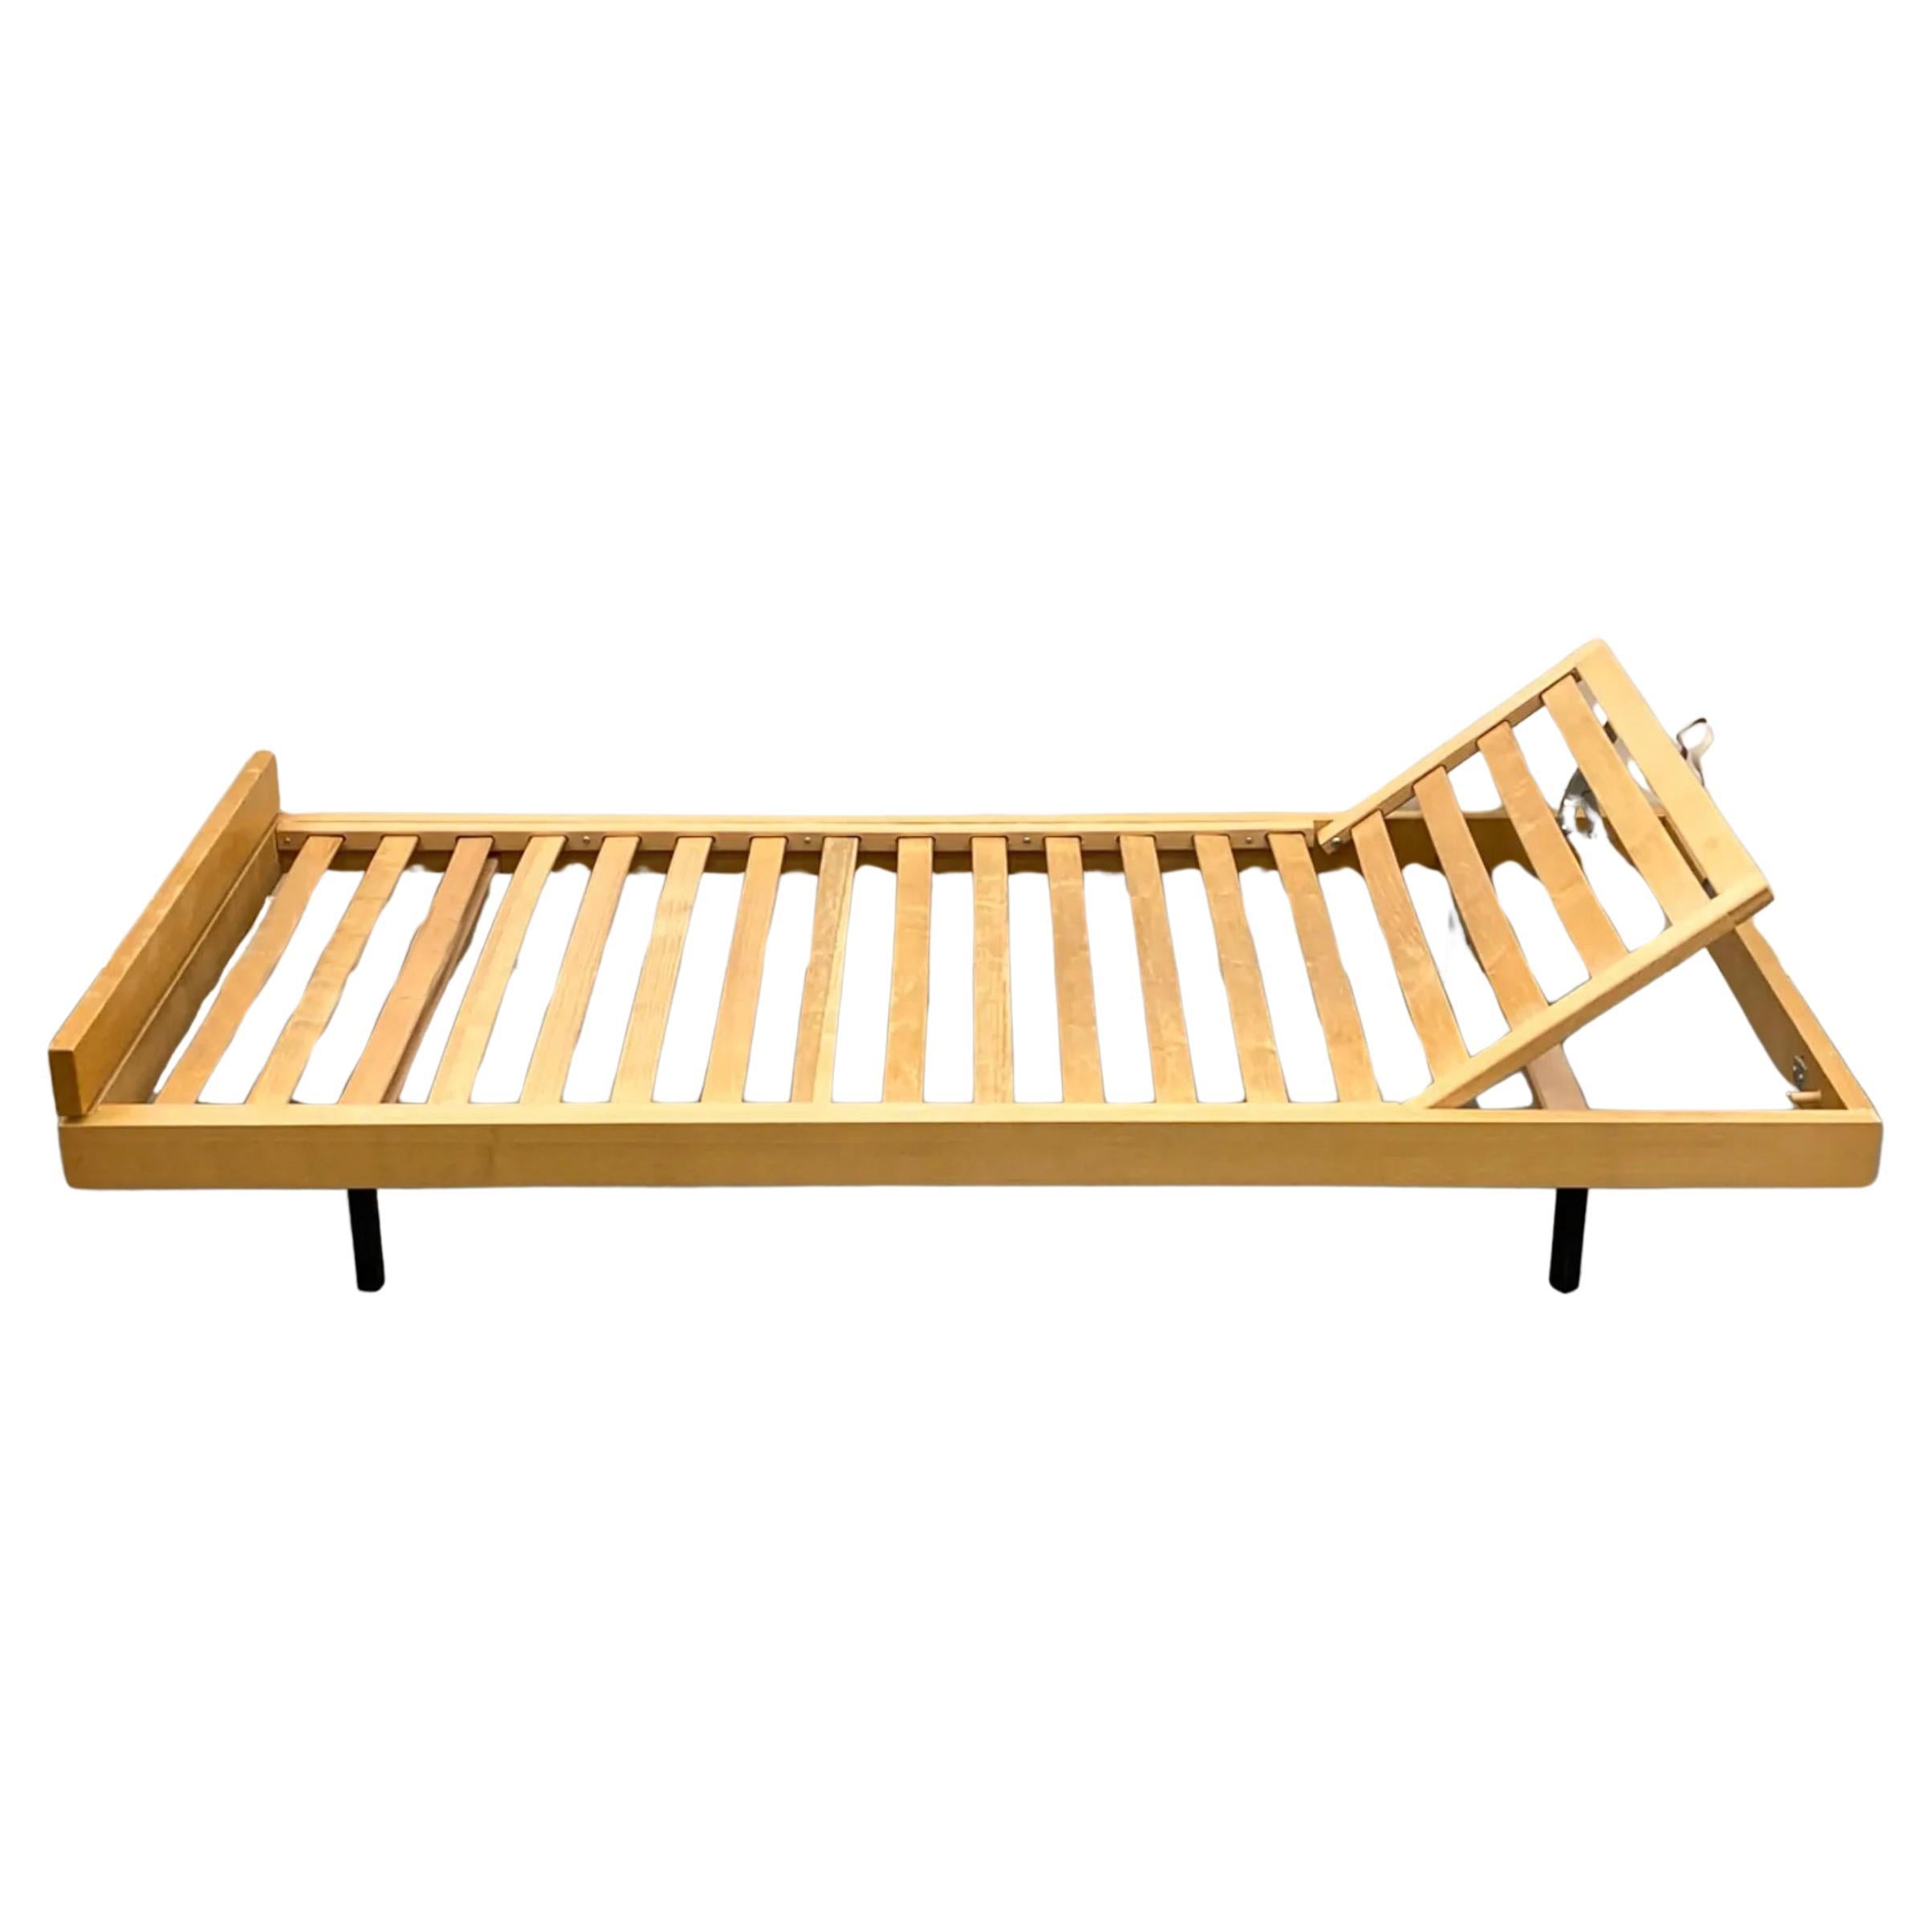 Midcentury Swiss Modern chaise daybed by Holma with ash and rosewood wood frame and legs. Has articulating headrest with collapsible legs and hidden casters, allowing for convenient roll-under-the-bed storage, c. 1970. Good vintage condition does